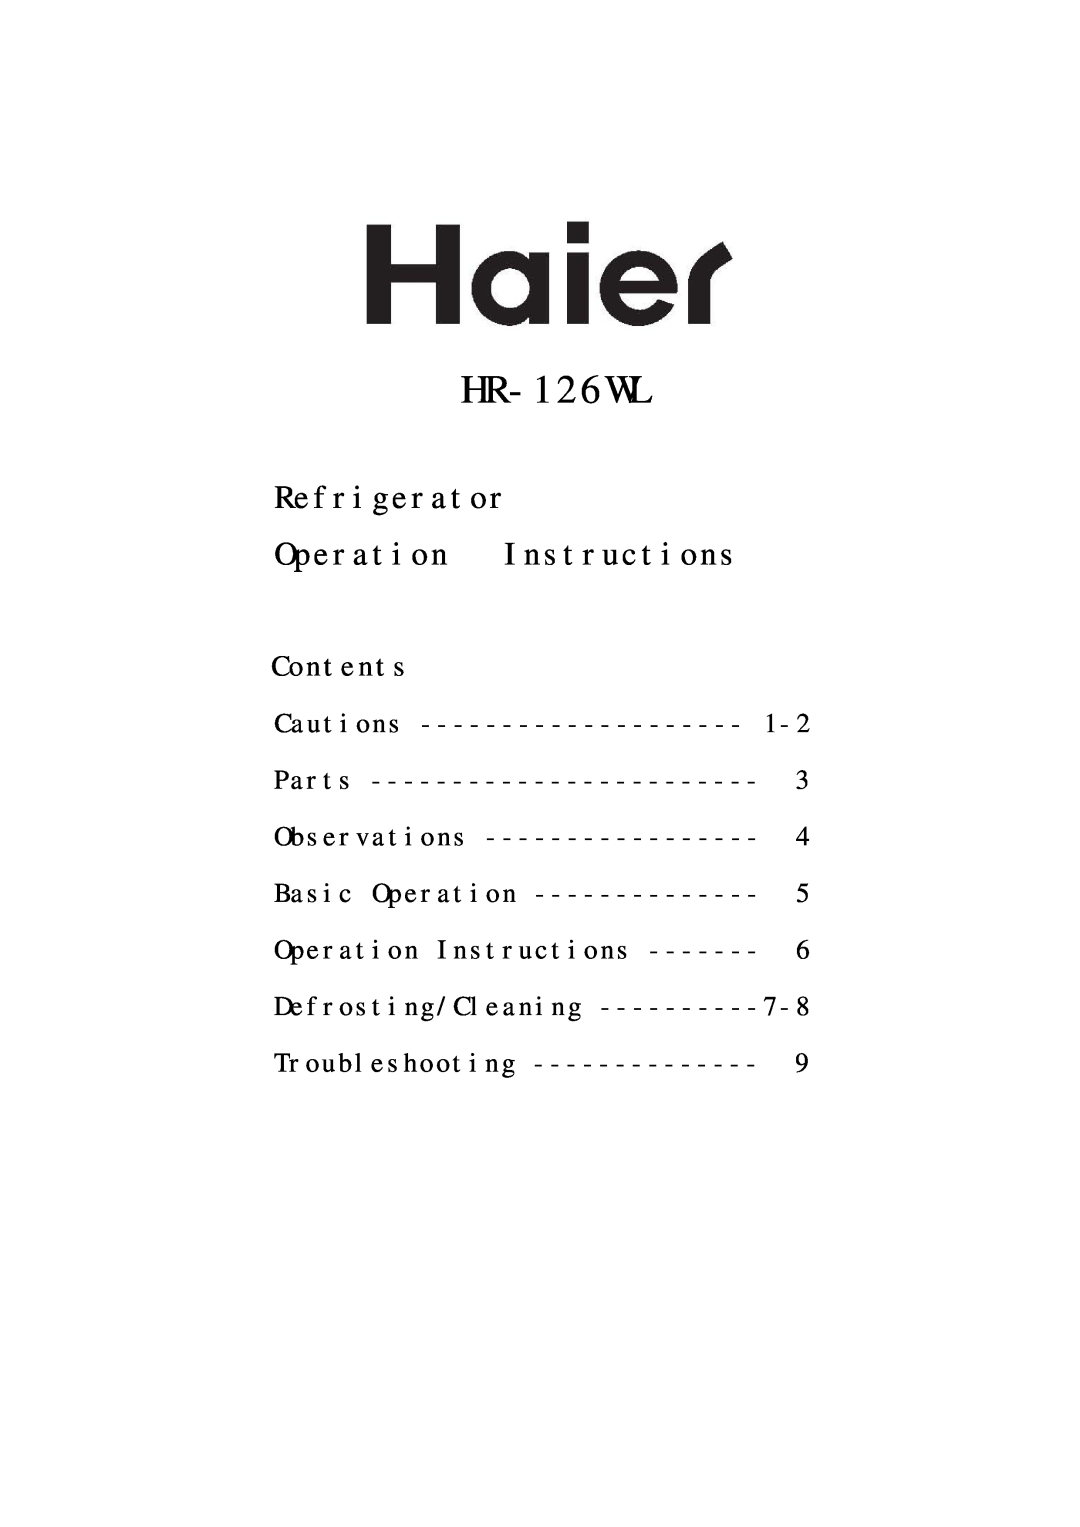 Haier HR-126WL manual Refrigerator Operation Instructions, Contents, Cautions, Parts, Basic Operation, Troubleshooting 